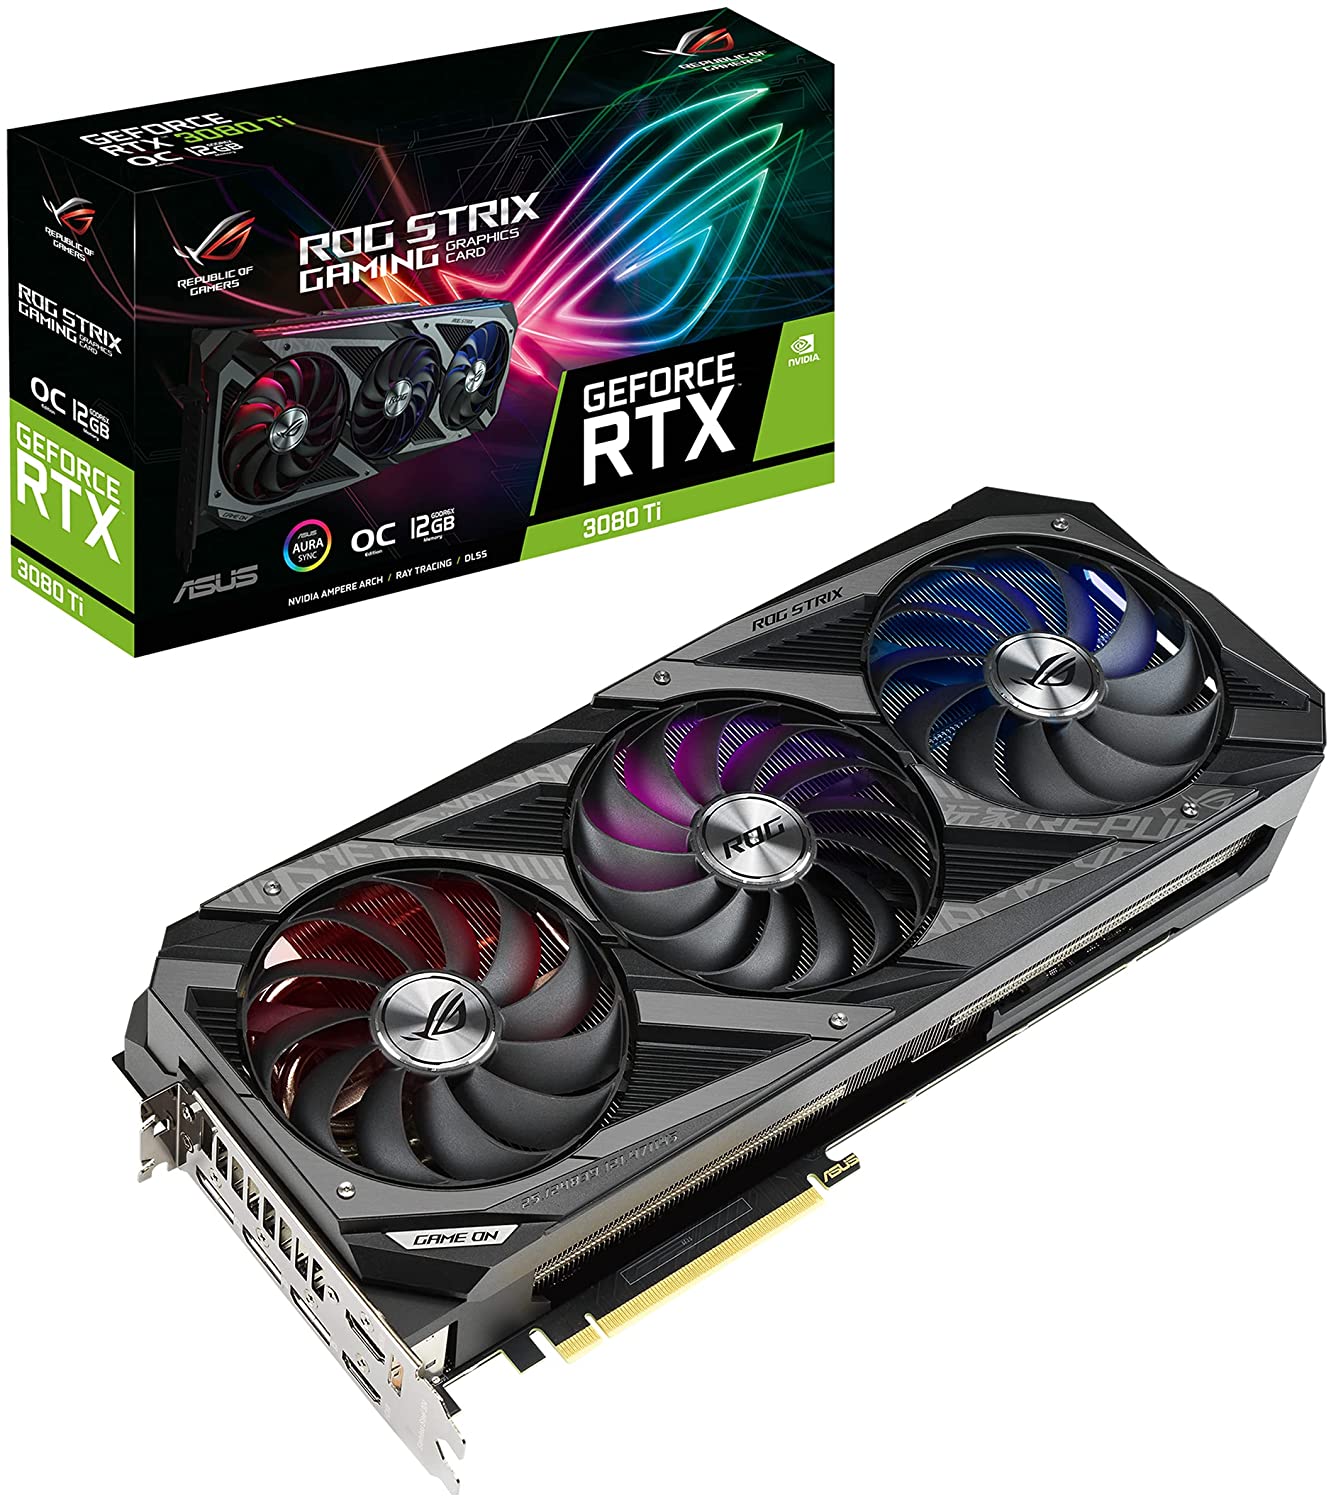 ASUS ROG Strix NVIDIA GeForce RTX 3080 Ti OC Edition Gaming (PCIe 4.0/12 Go GDDR6X/HDMI 2.1/Axial-tech Fan Design/2.9-Slot, Super Alloy Power II/ASUS Auto-Extreme Technology)